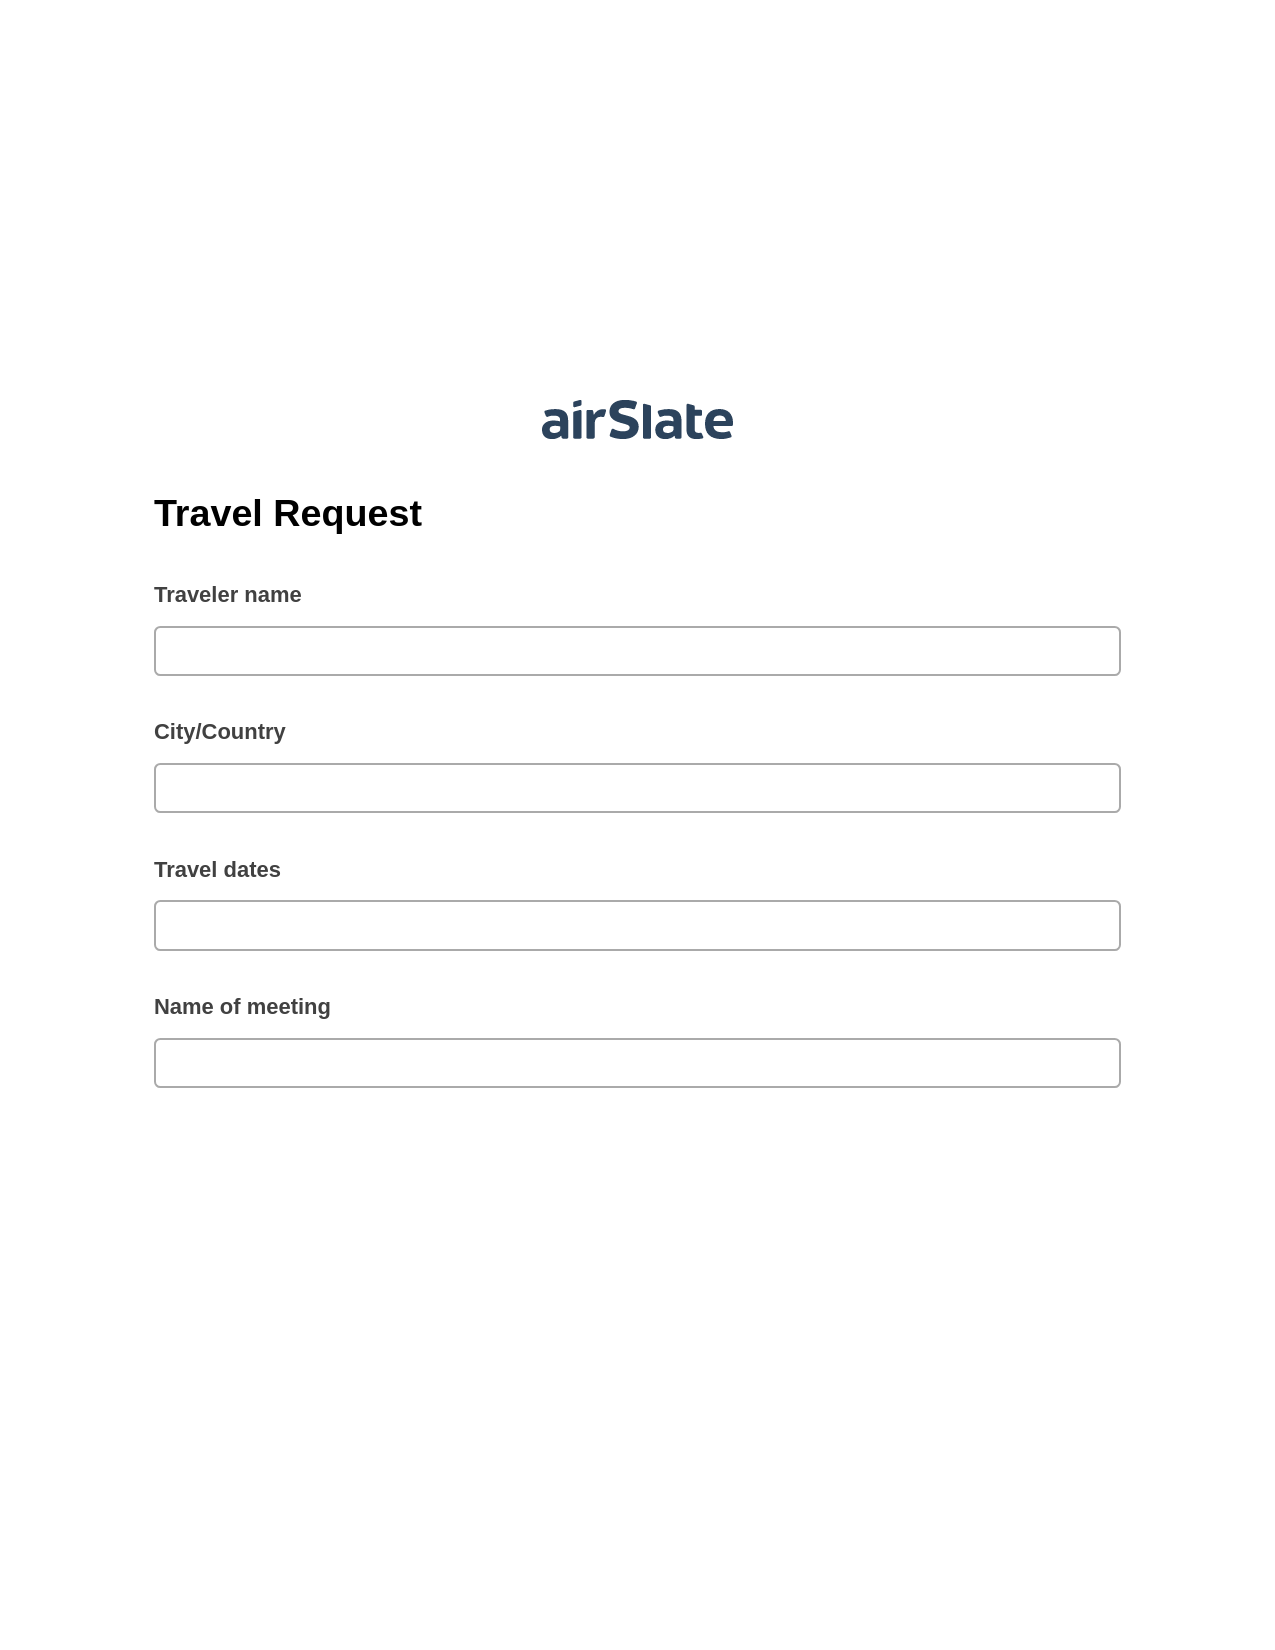 Travel Request Pre-fill from NetSuite Records Bot, Unassign Role Bot, Export to Google Sheet Bot